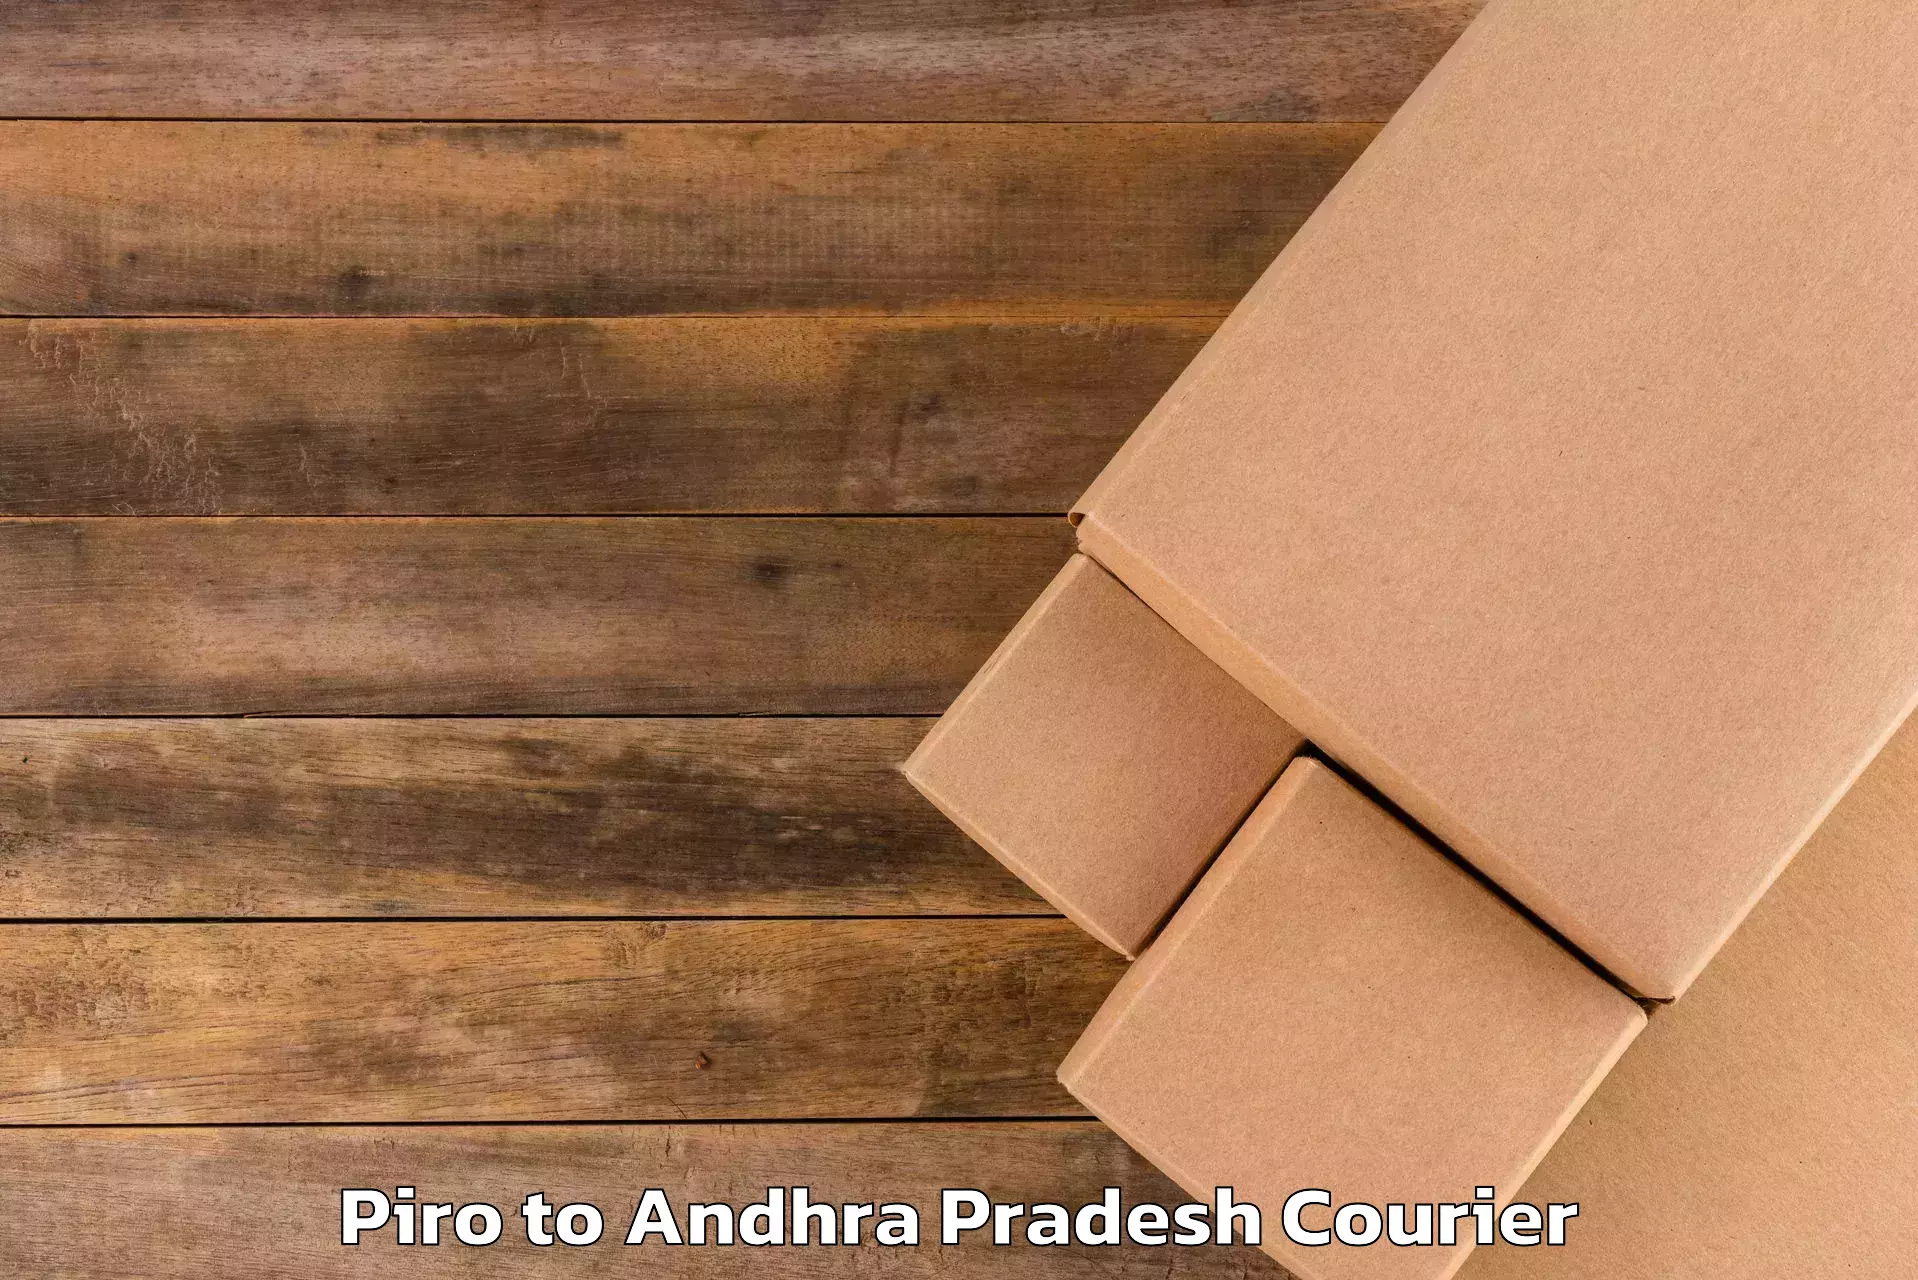 Luggage delivery network Piro to Andhra Pradesh